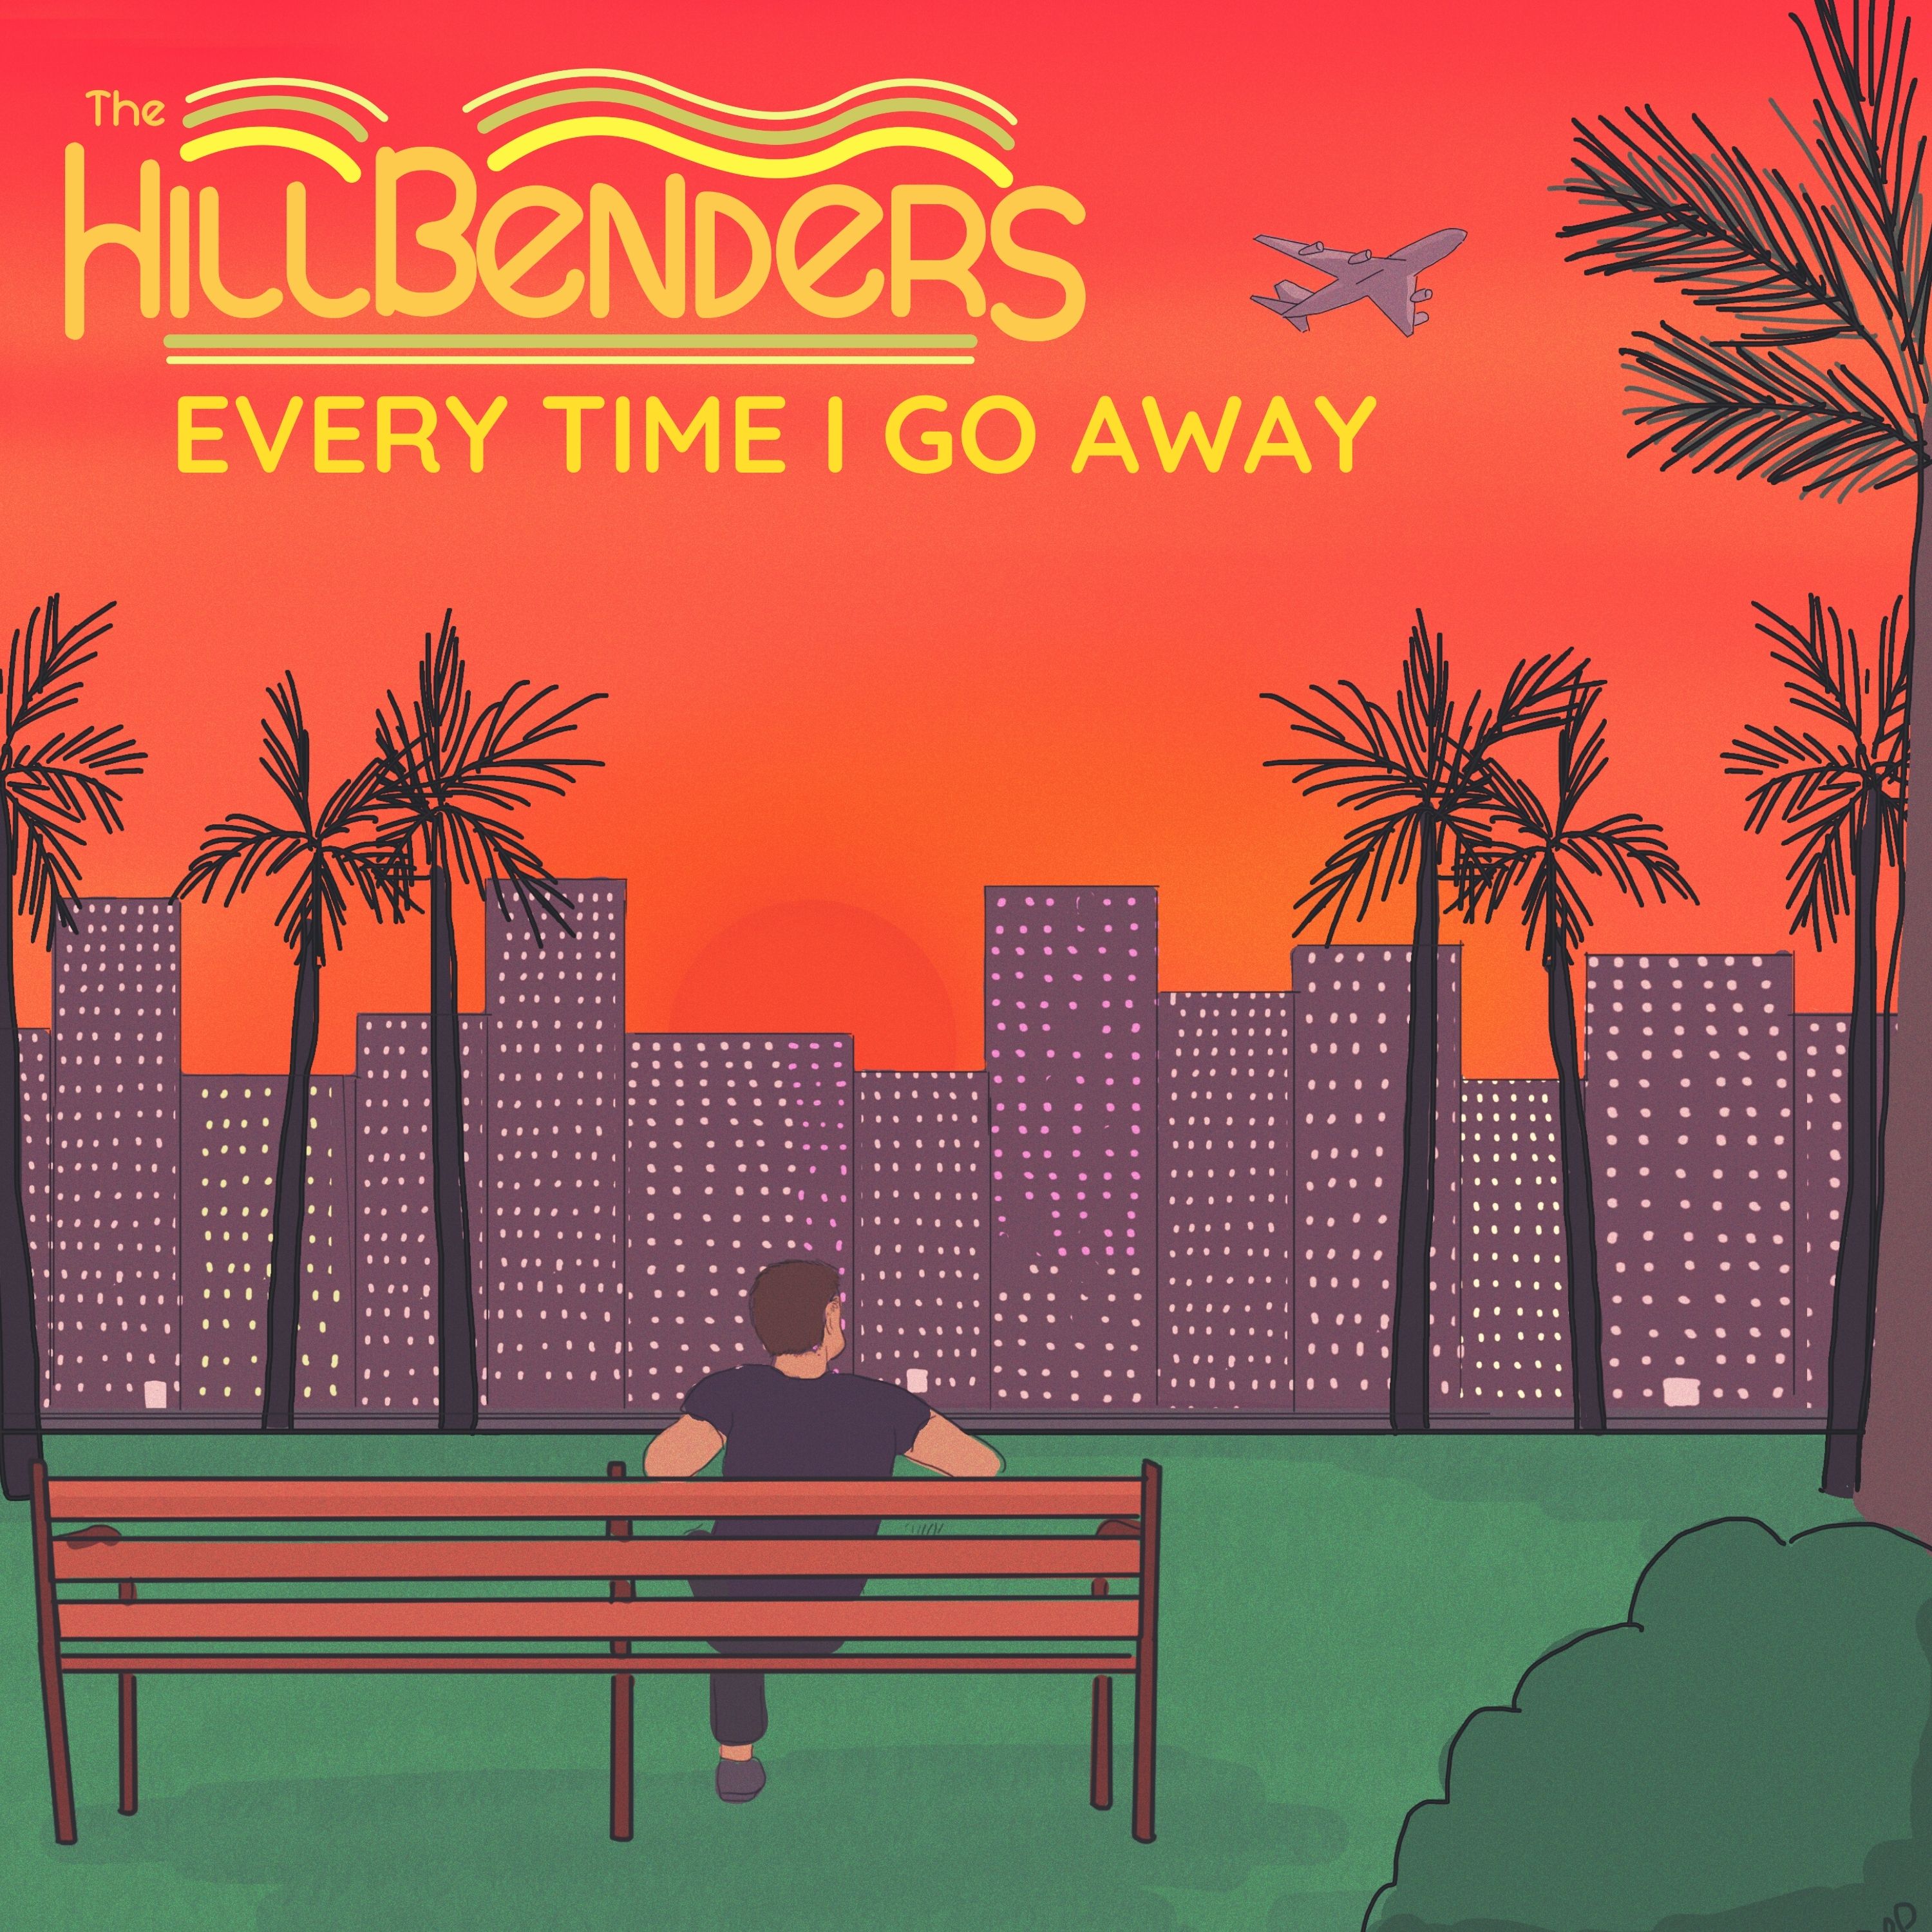 THE HILLBENDERS PREMIERE “EVERY TIME I GO AWAY” VIDEO AND SINGLE